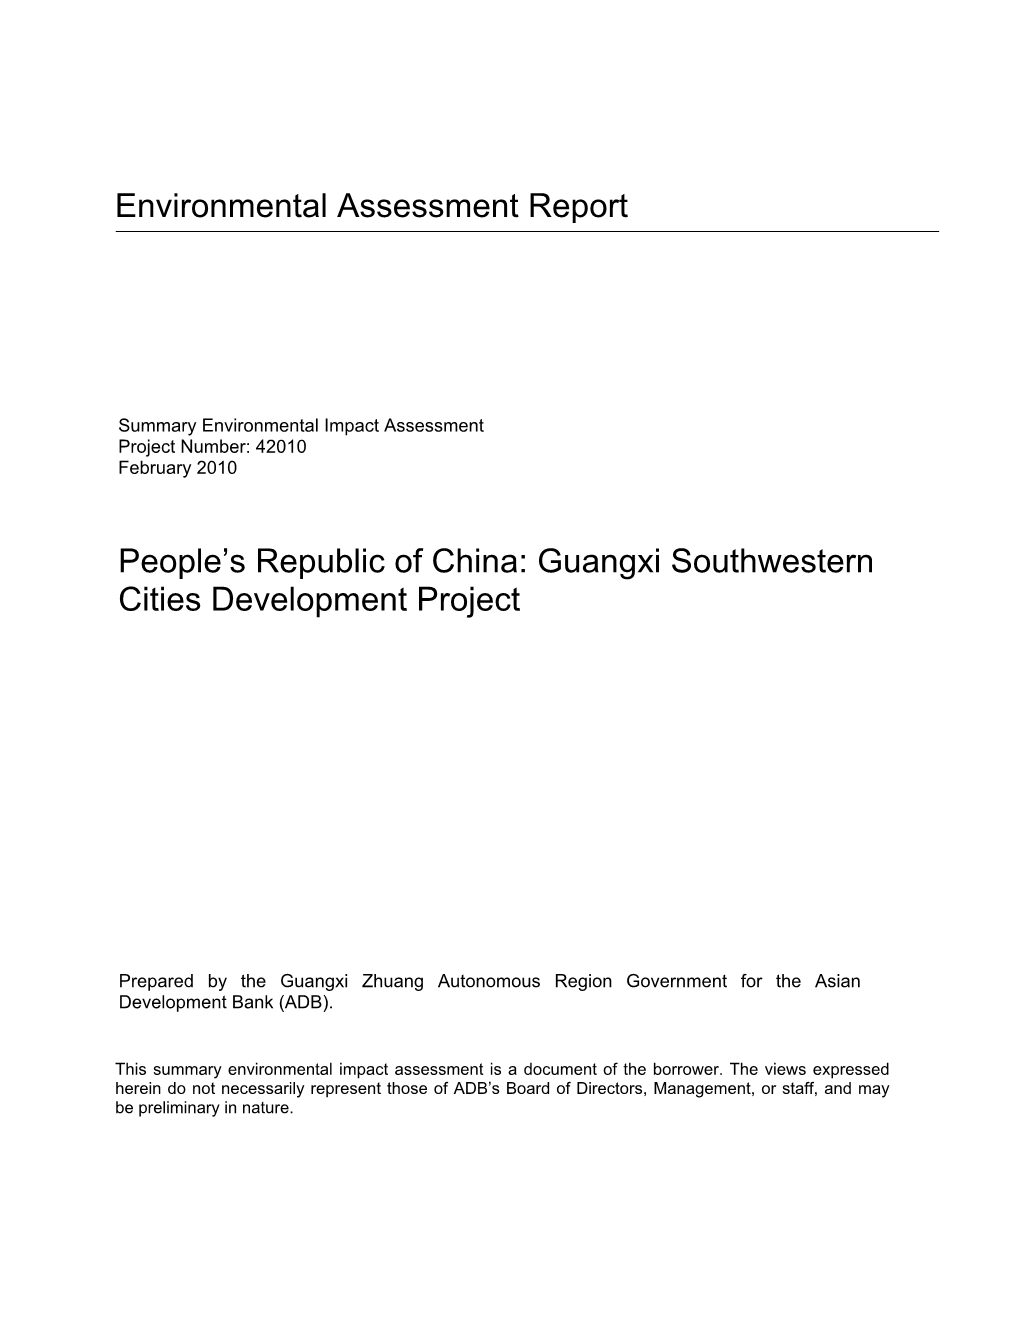 Summary Environmental Impact Assessment Project Number: 42010 February 2010